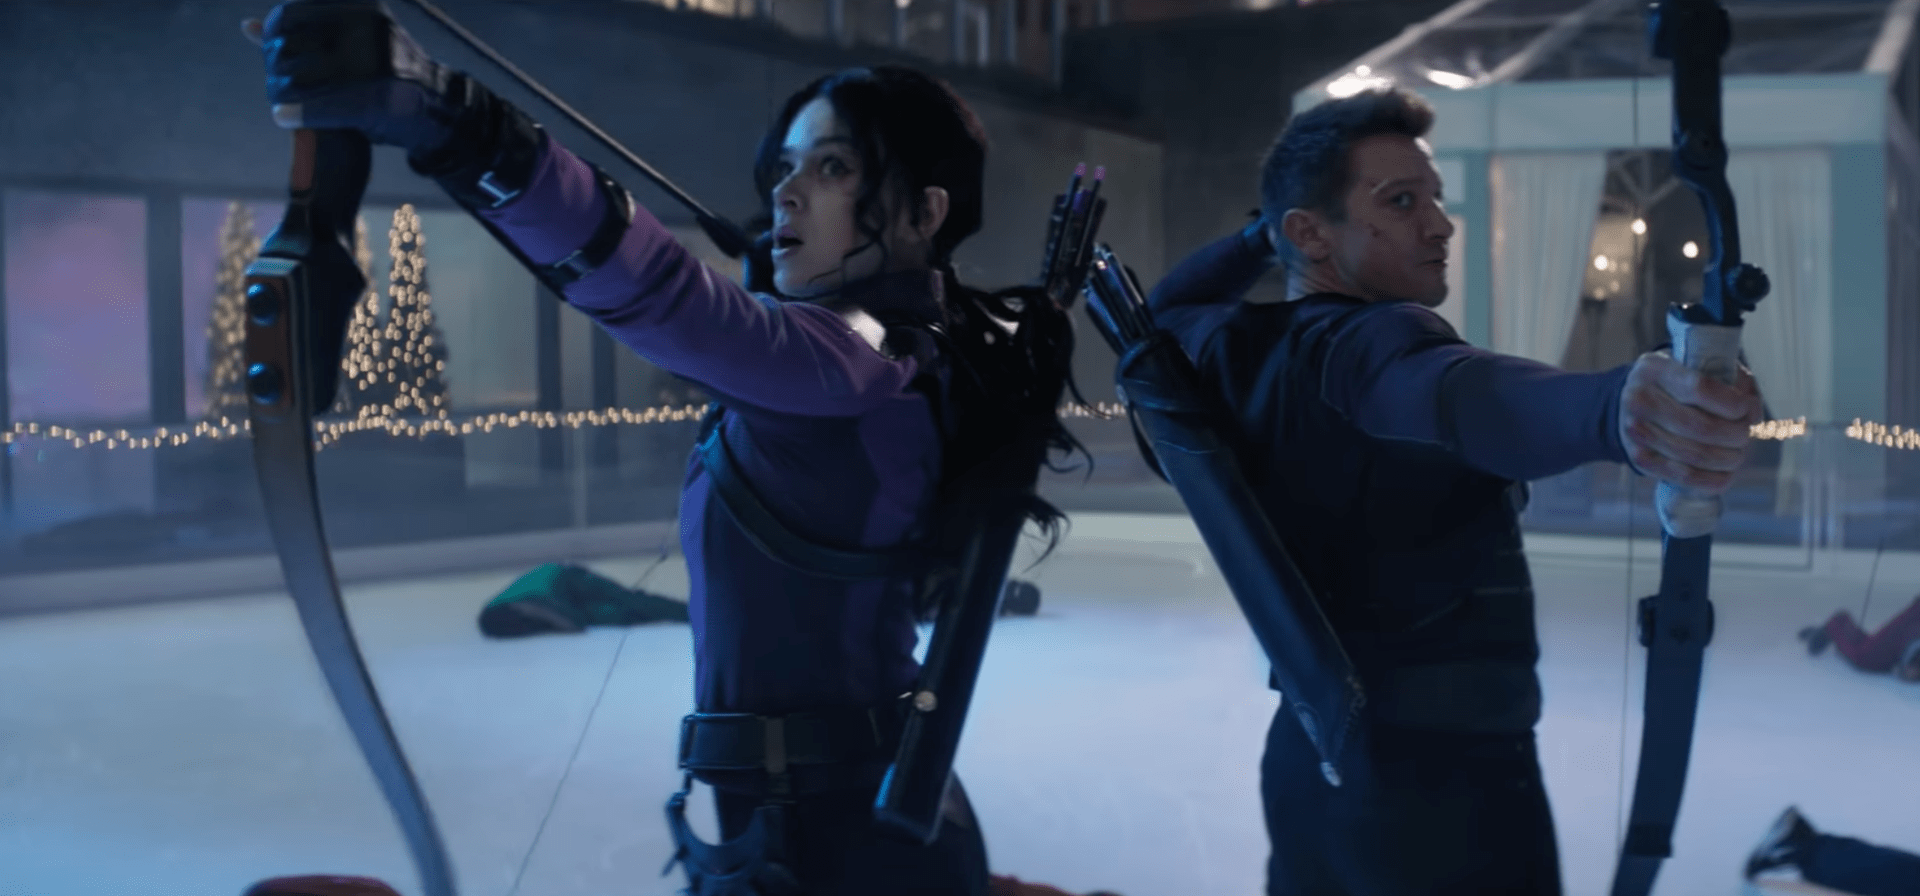 Disney+ reveals 'Hawkeye' trailer and holiday release date